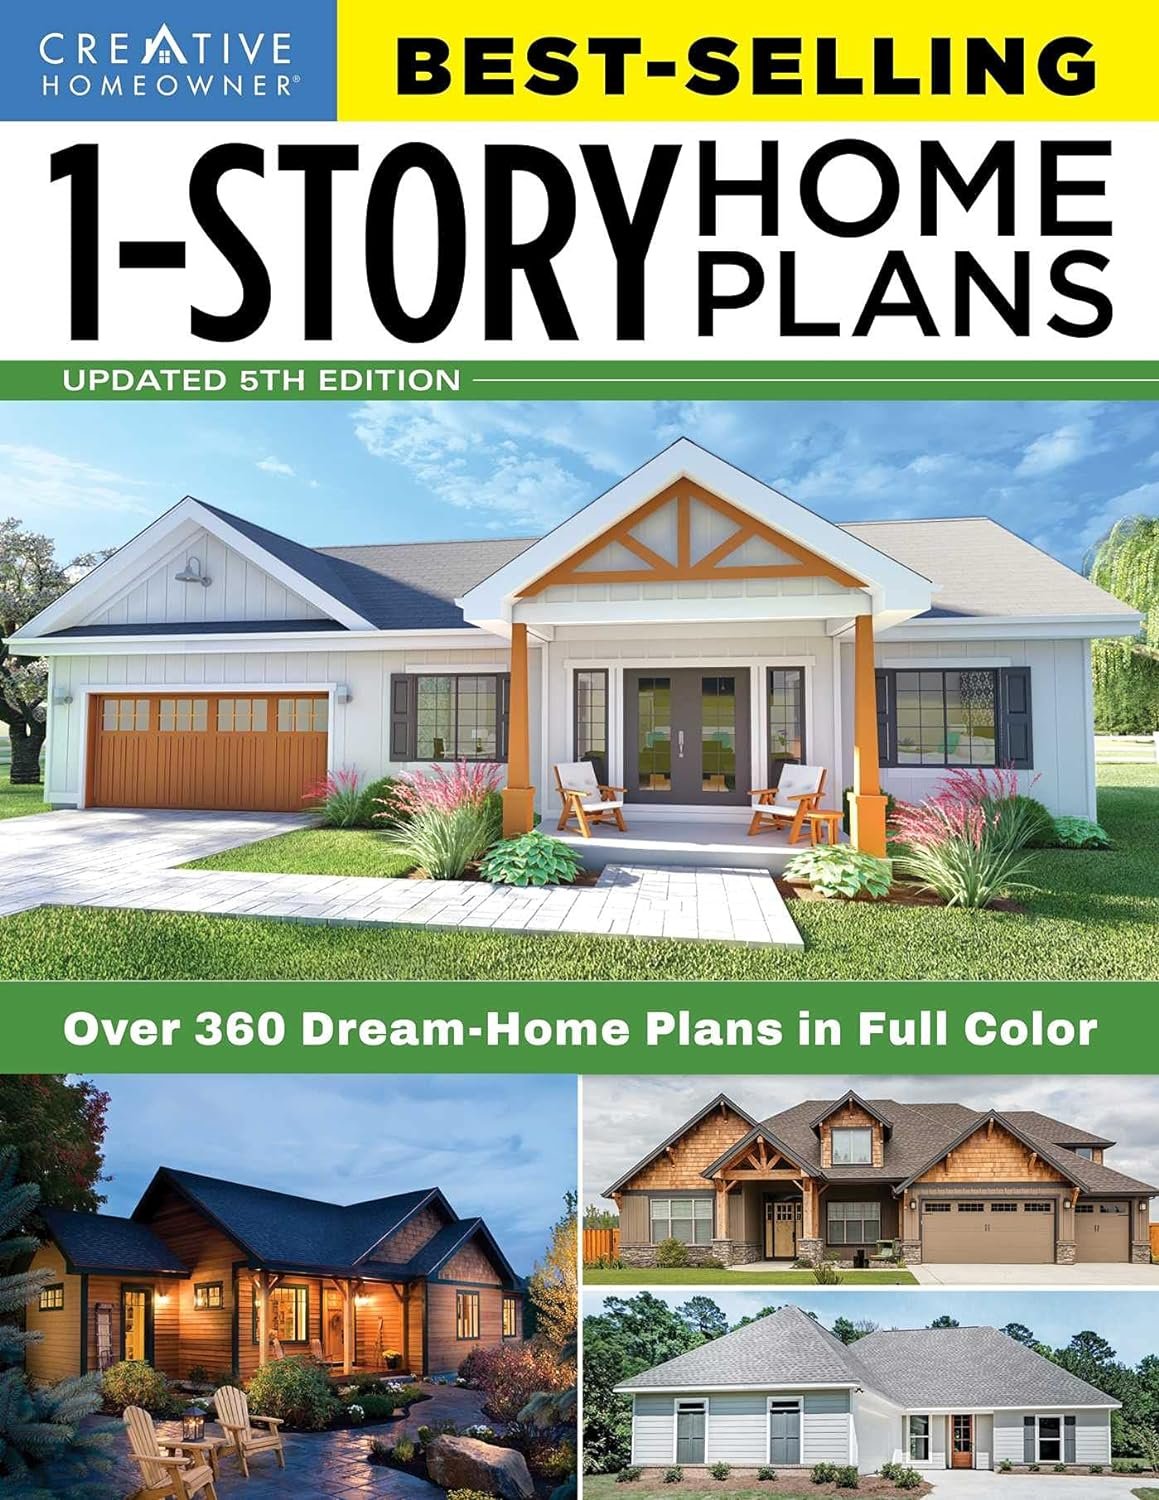 Best Selling 1 Story Home Plans 5th Edition Over 360 Dream Home Plans